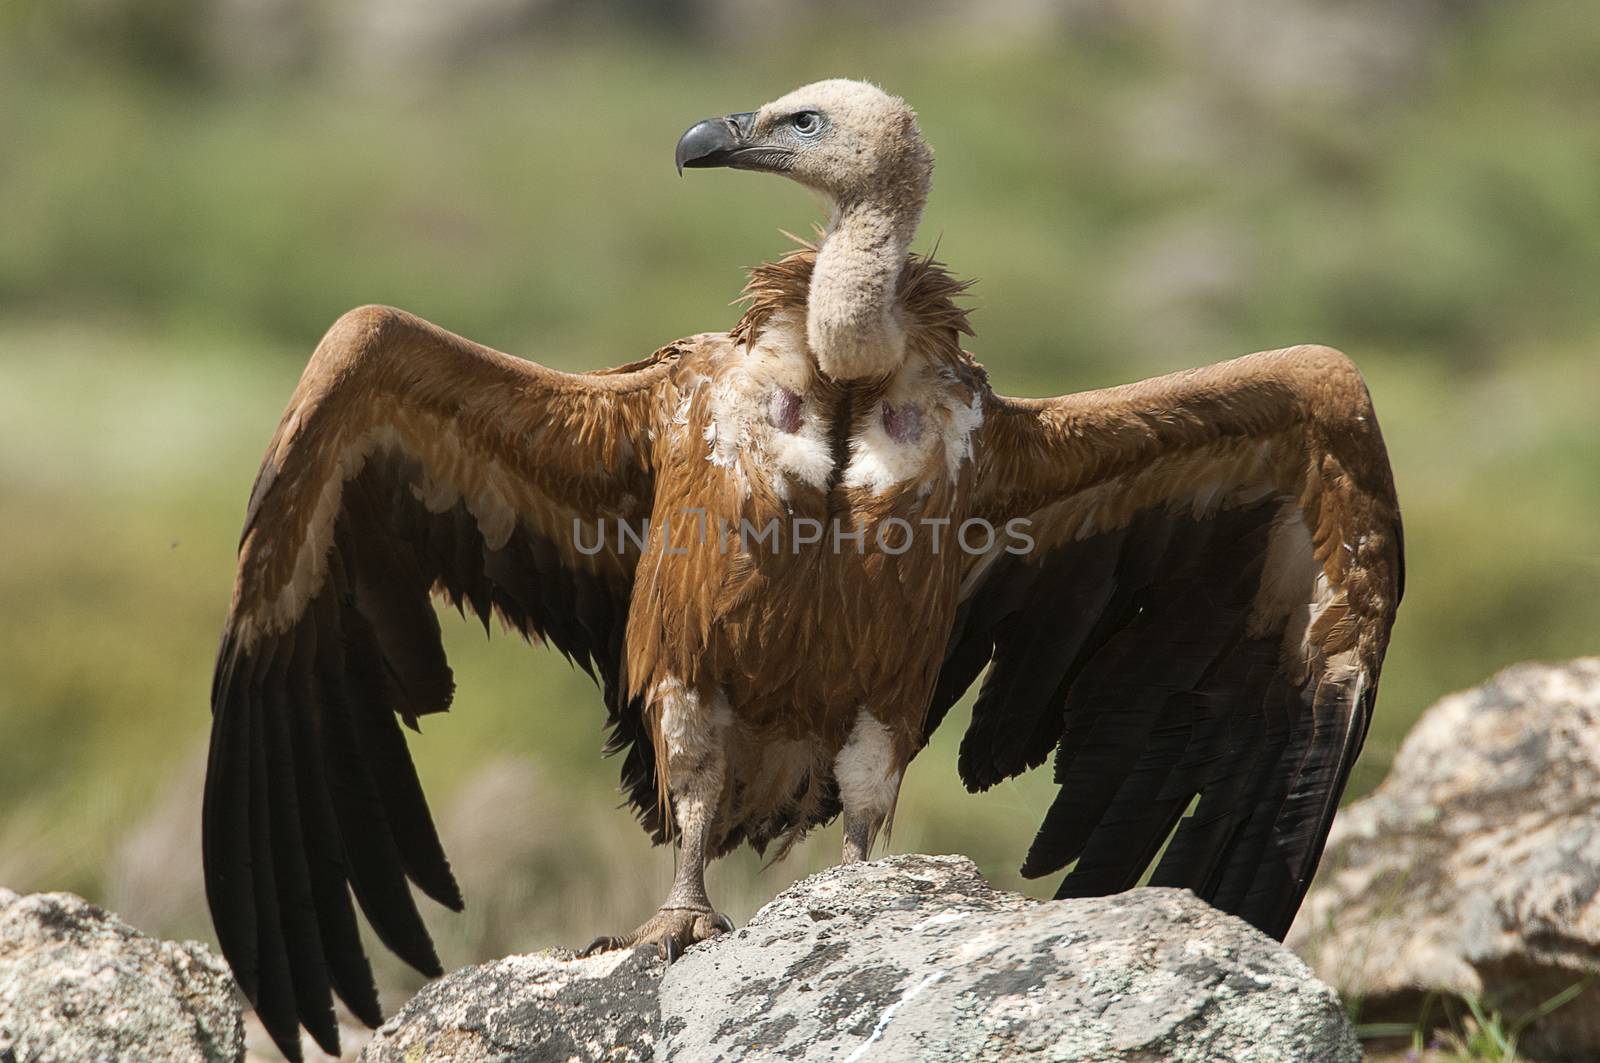 Griffon Vulture (Gyps fulvus) with open wings, flying scavenger birds